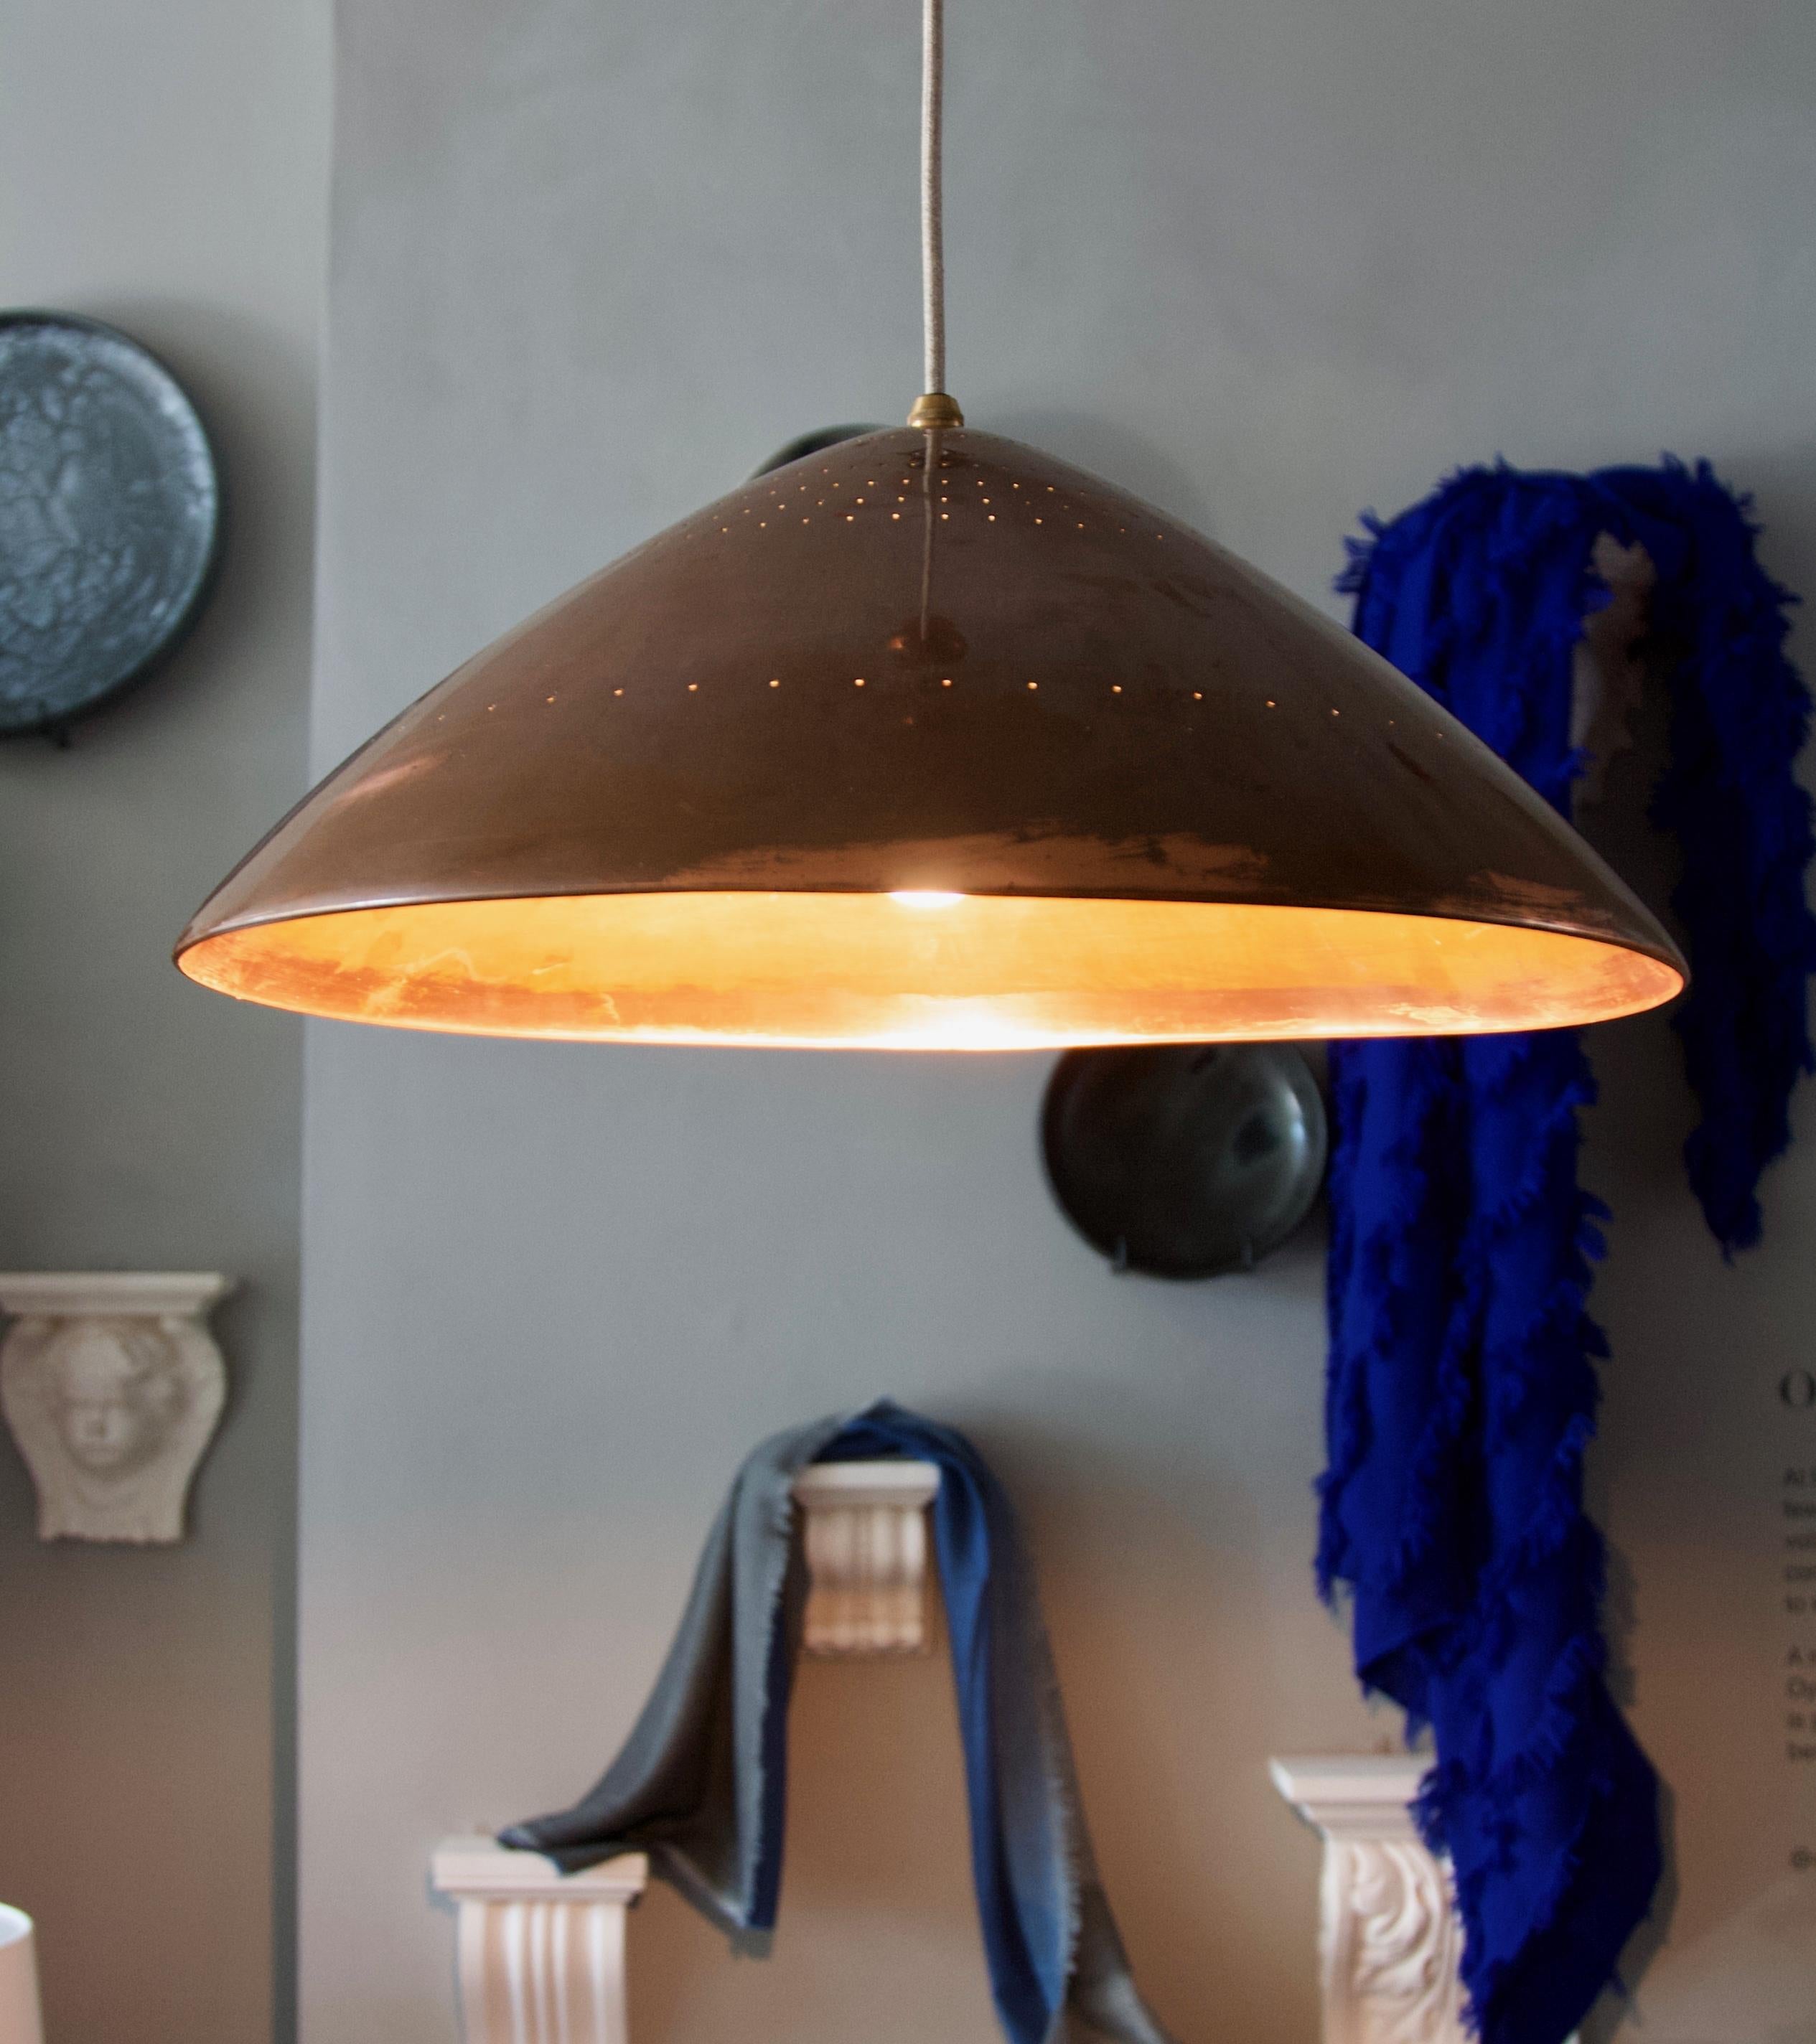 A large solid copper ‘rise & fall’ pendant light, most probably designed and made in Germany, circa 1960.
The elegant and unusually shaped shade has been perforated to create a subtle light effect once illuminated. The perforations are along six